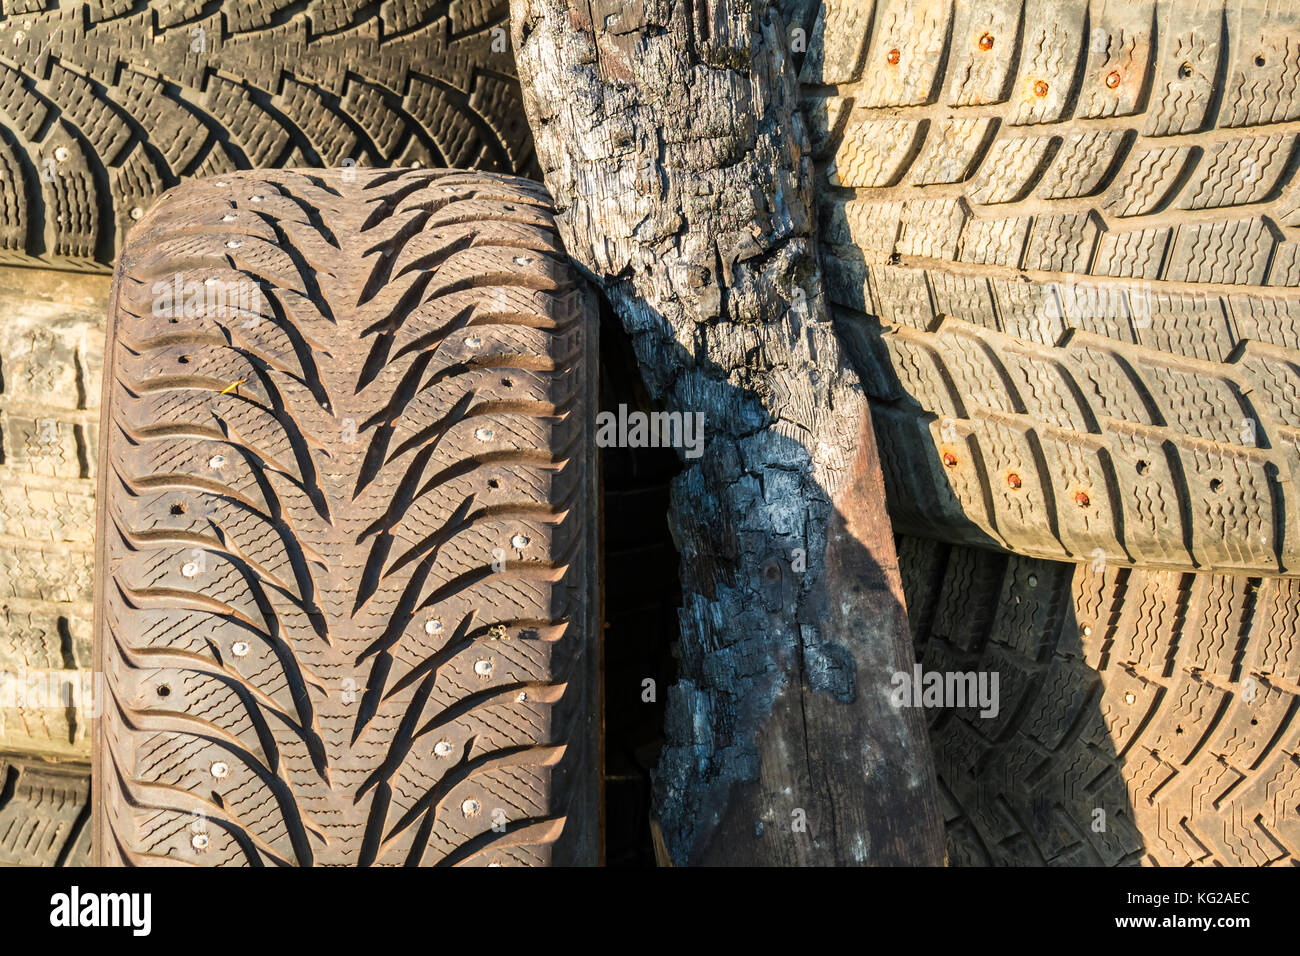 A stack of old tires with textured tread and charred plank on sunlight closeup Stock Photo